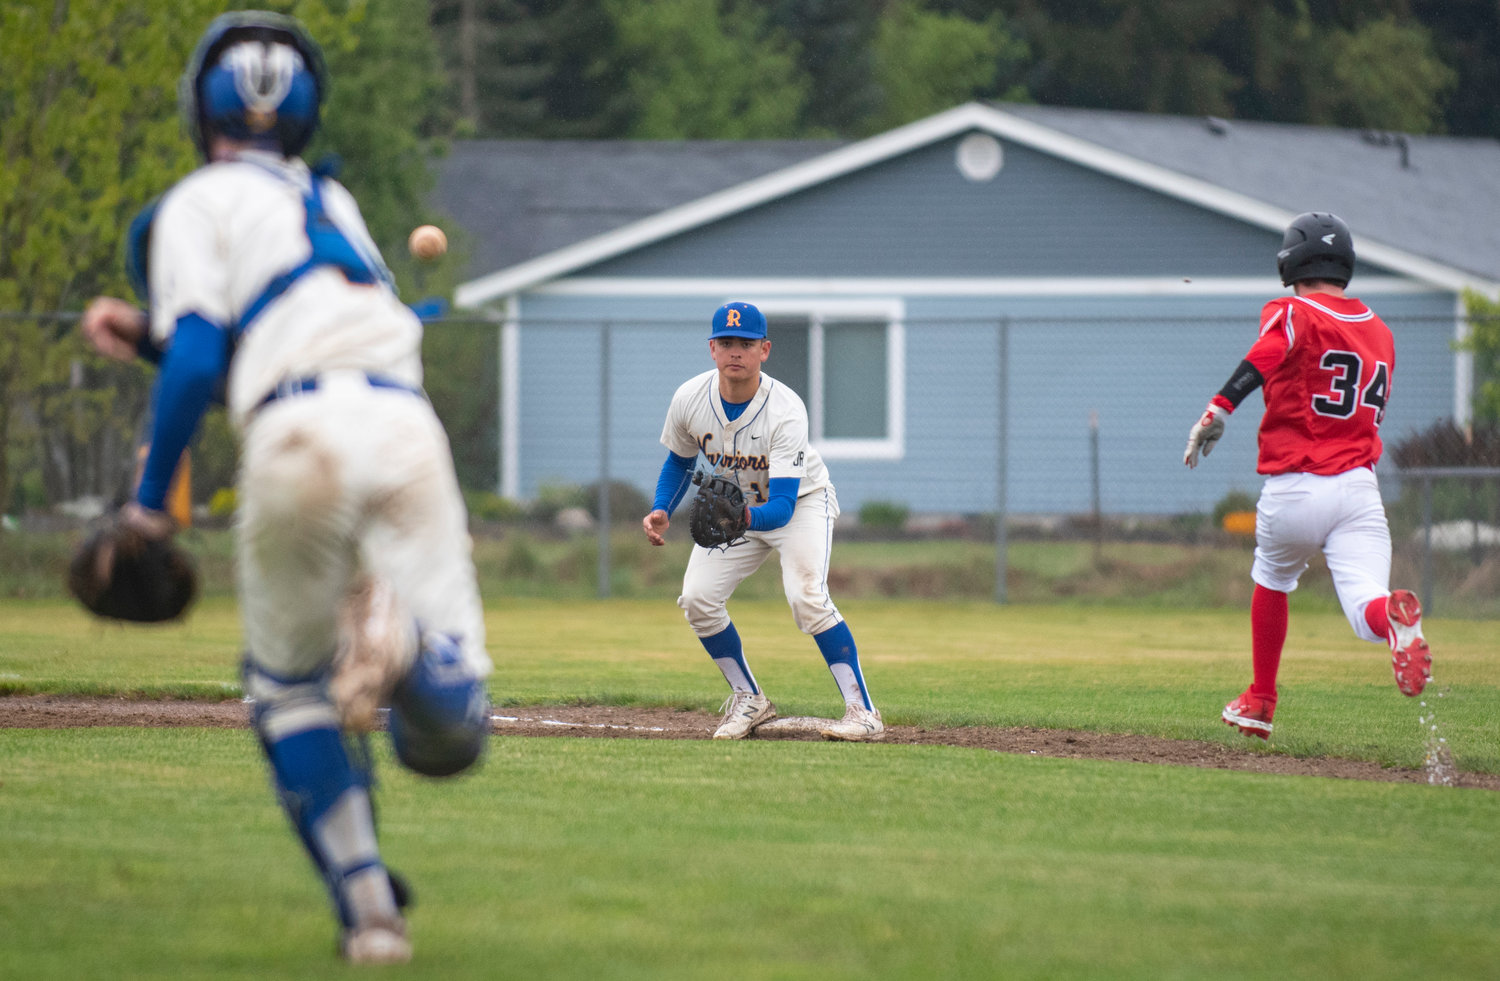 Rochester catcher Cody Morton throws out a Shelton runner at first base with a toss to Eddie Burkhardt.